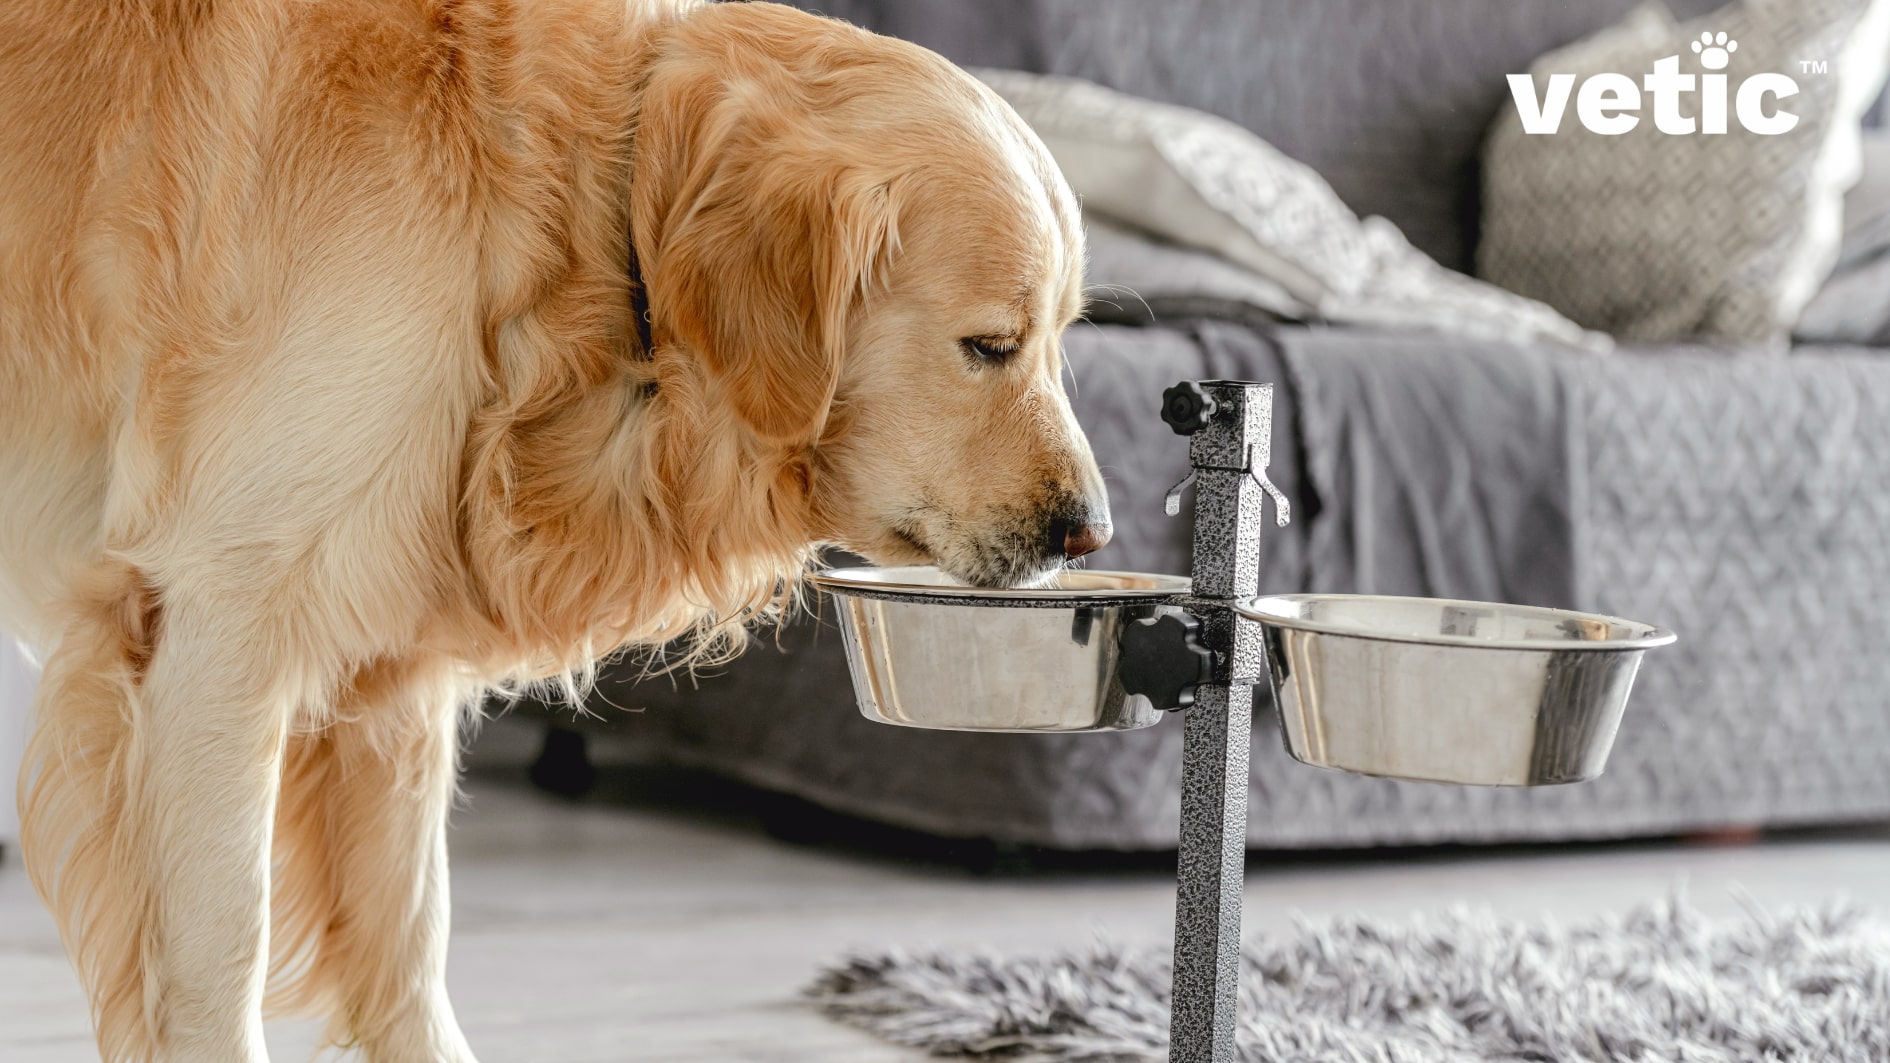 Golder Retriever adult eating from a raised bowl. Eating from a raise bowl like this one increases a dog's risk of bloat and gastric torsion.